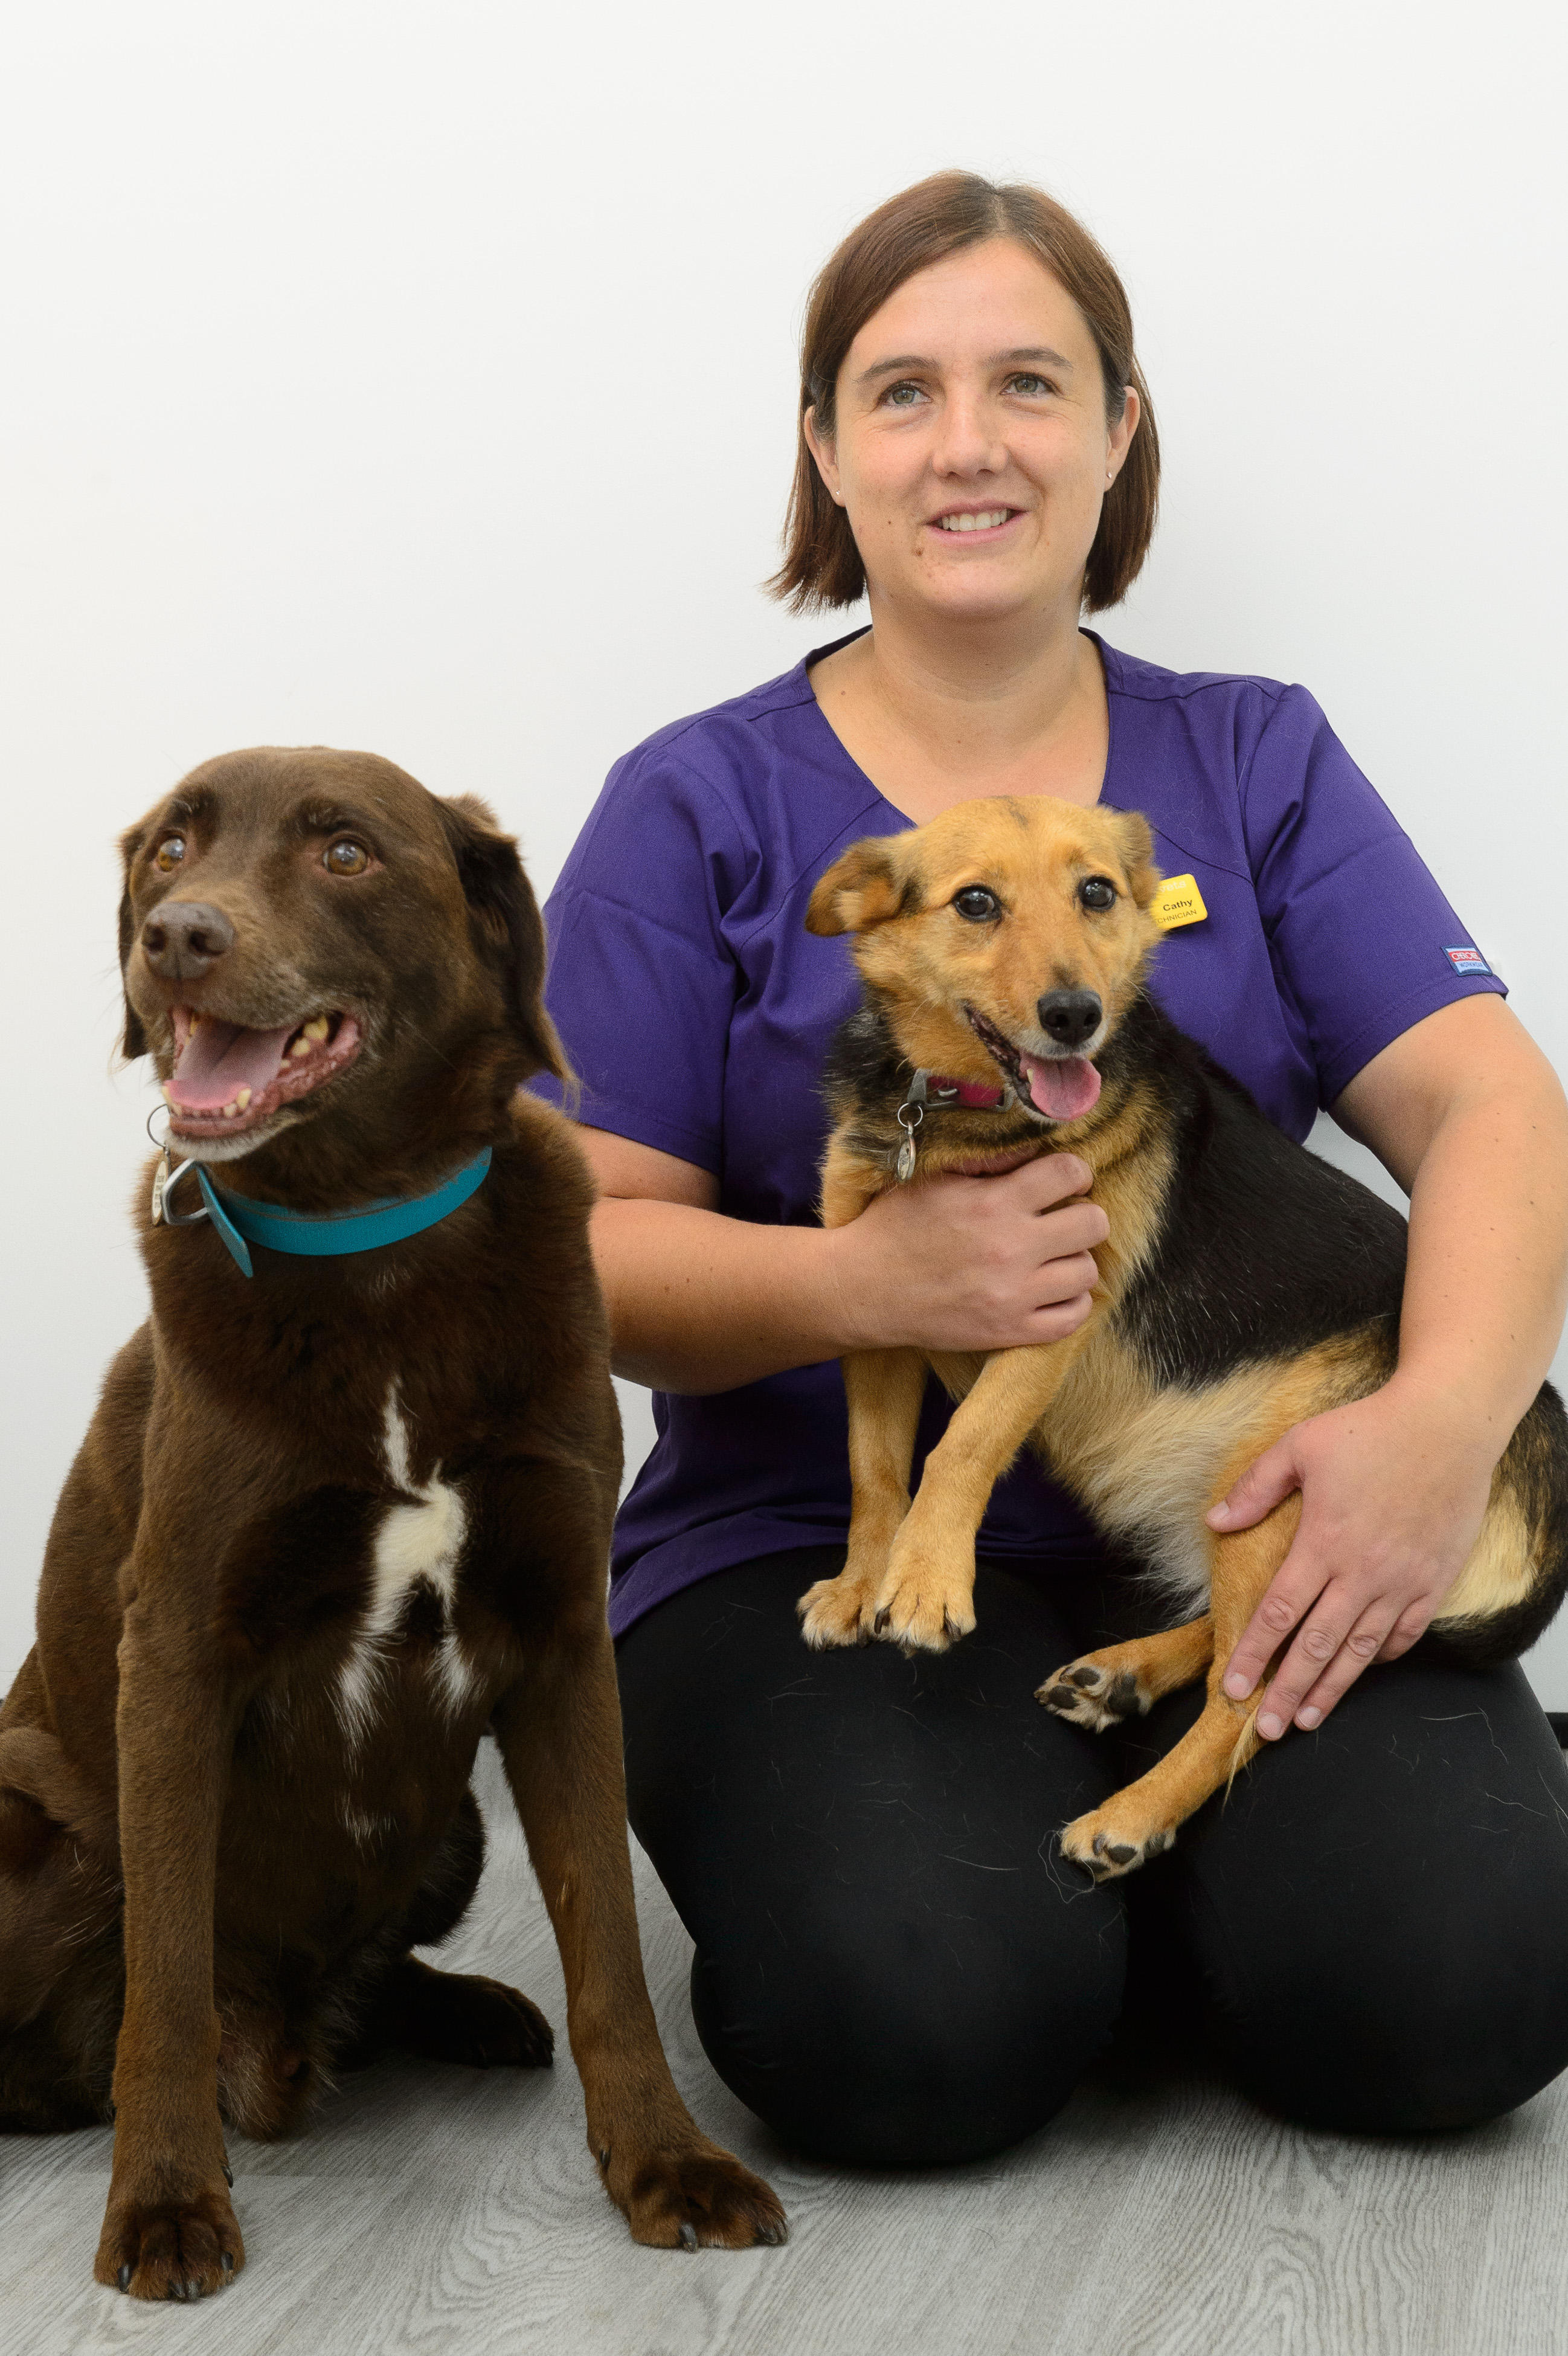 Images Valley Veterinary Hospital